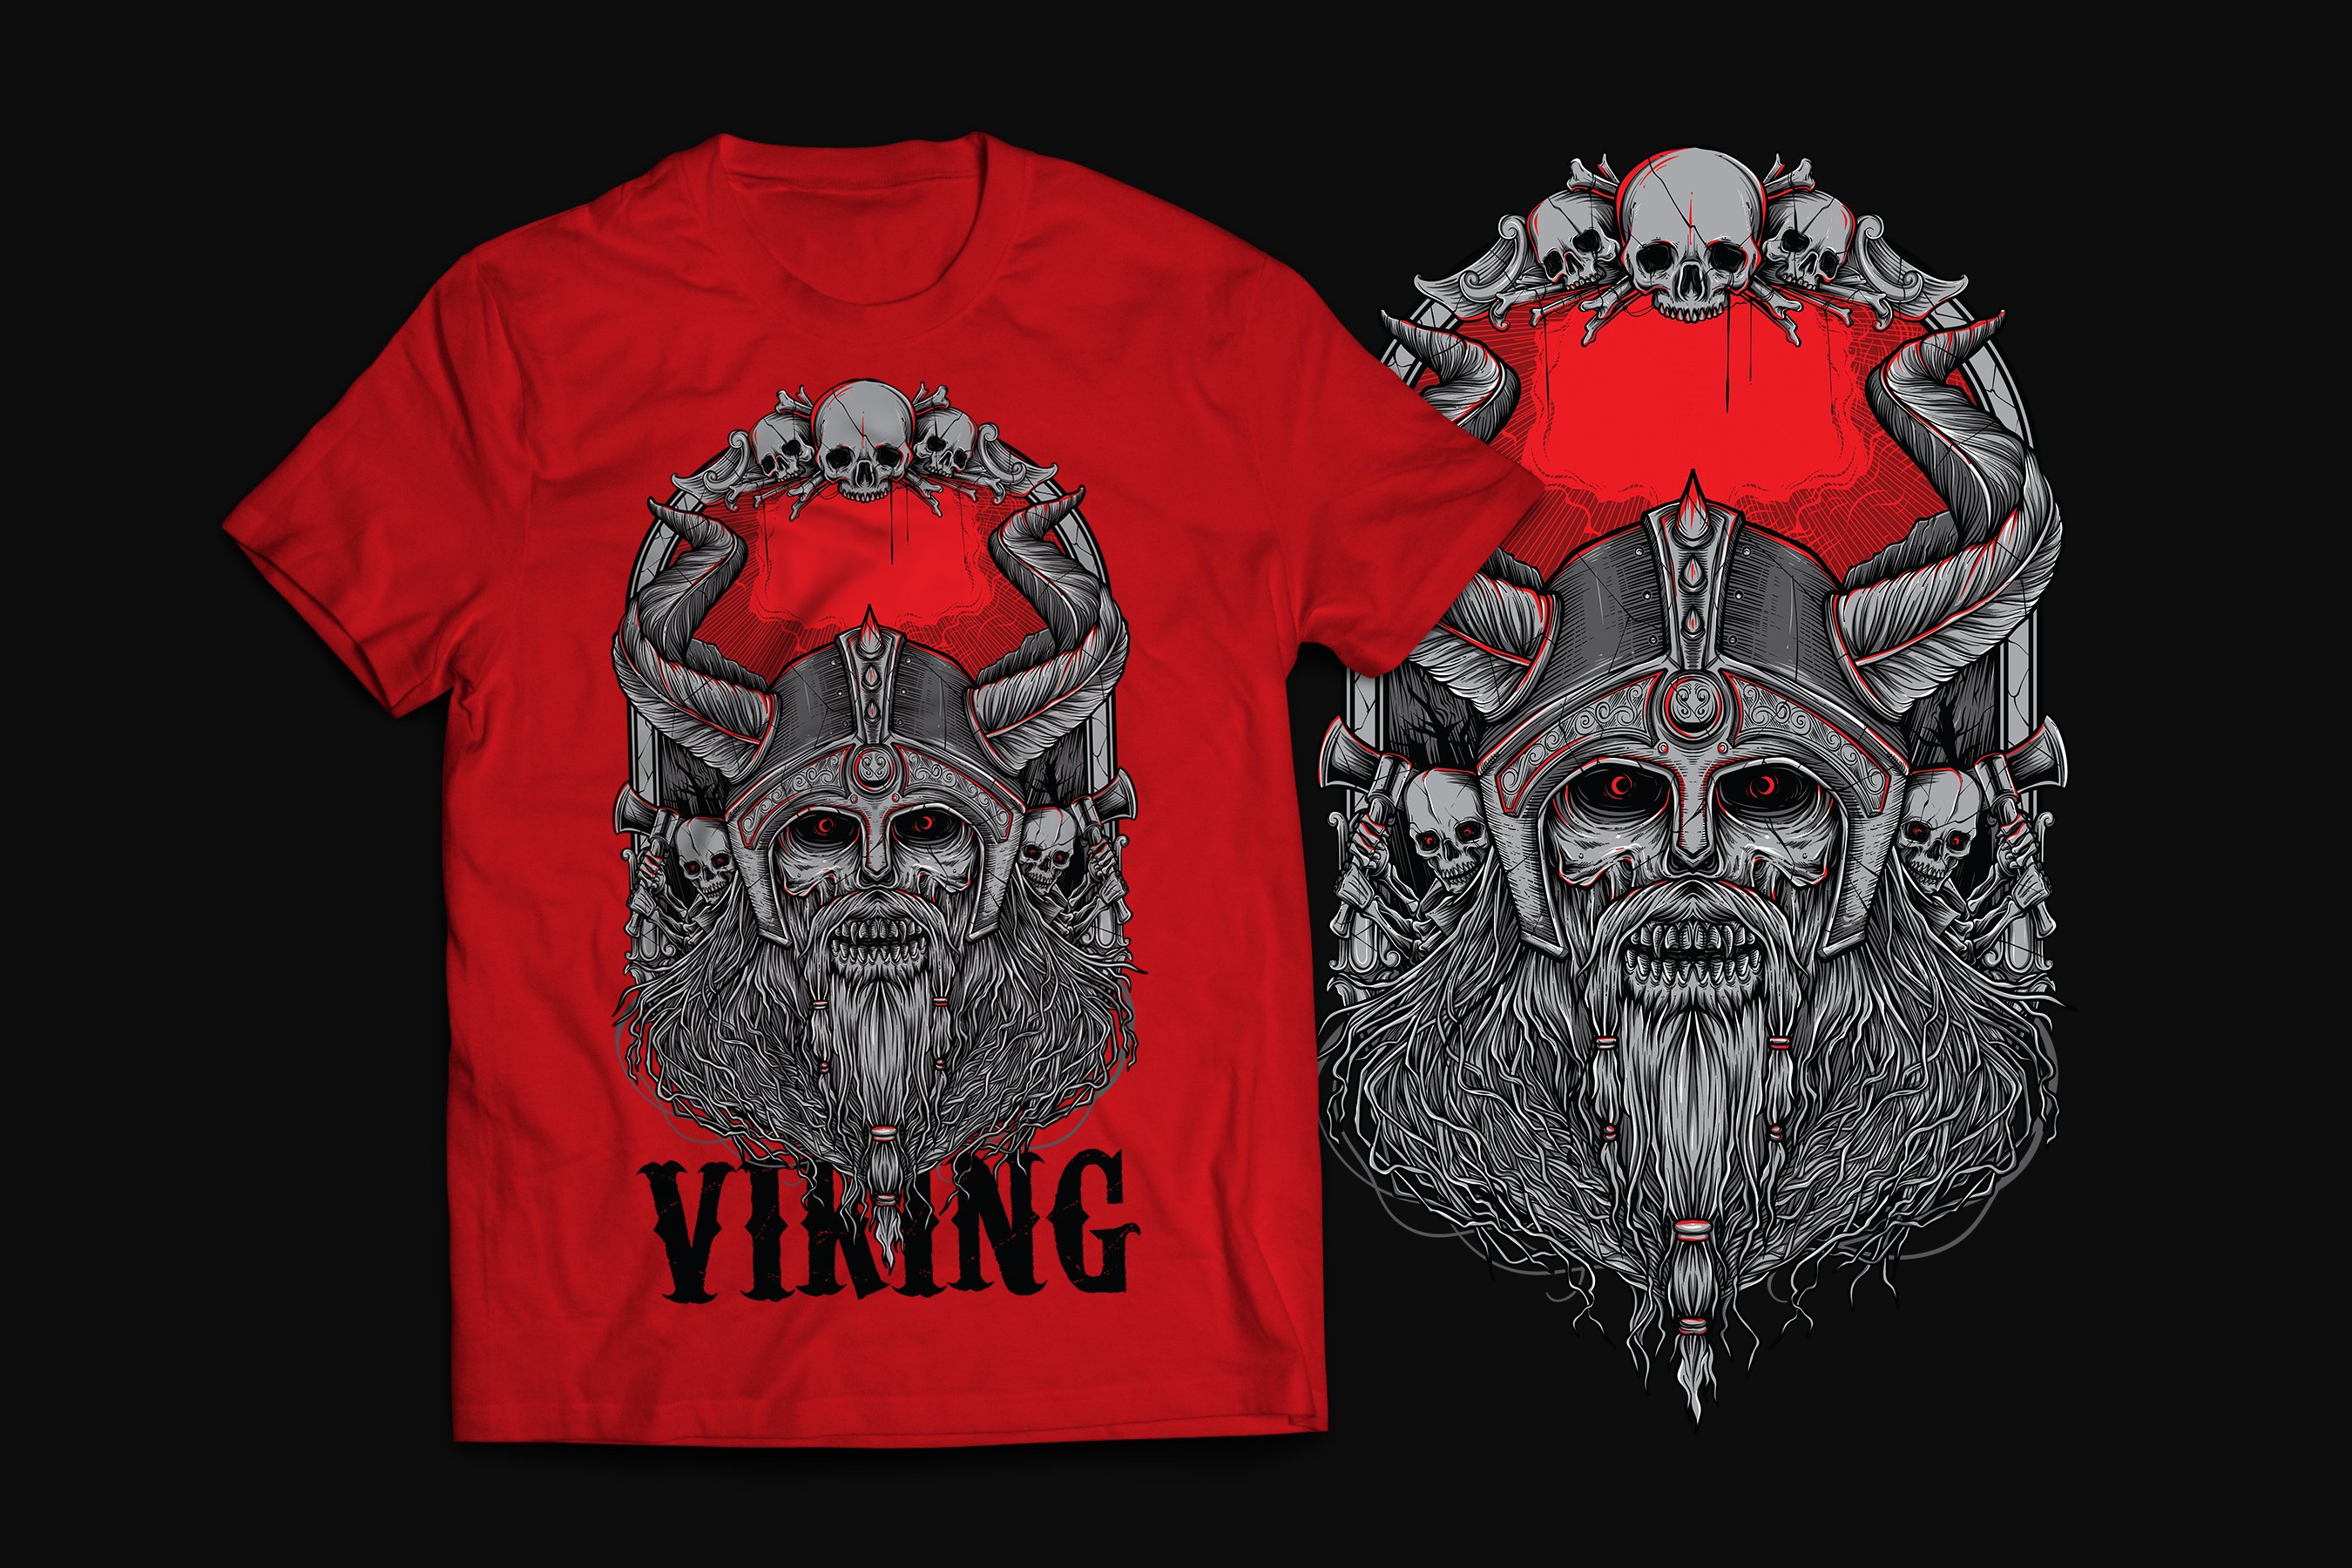 Rock and roll viking skull on the red t-shirt.